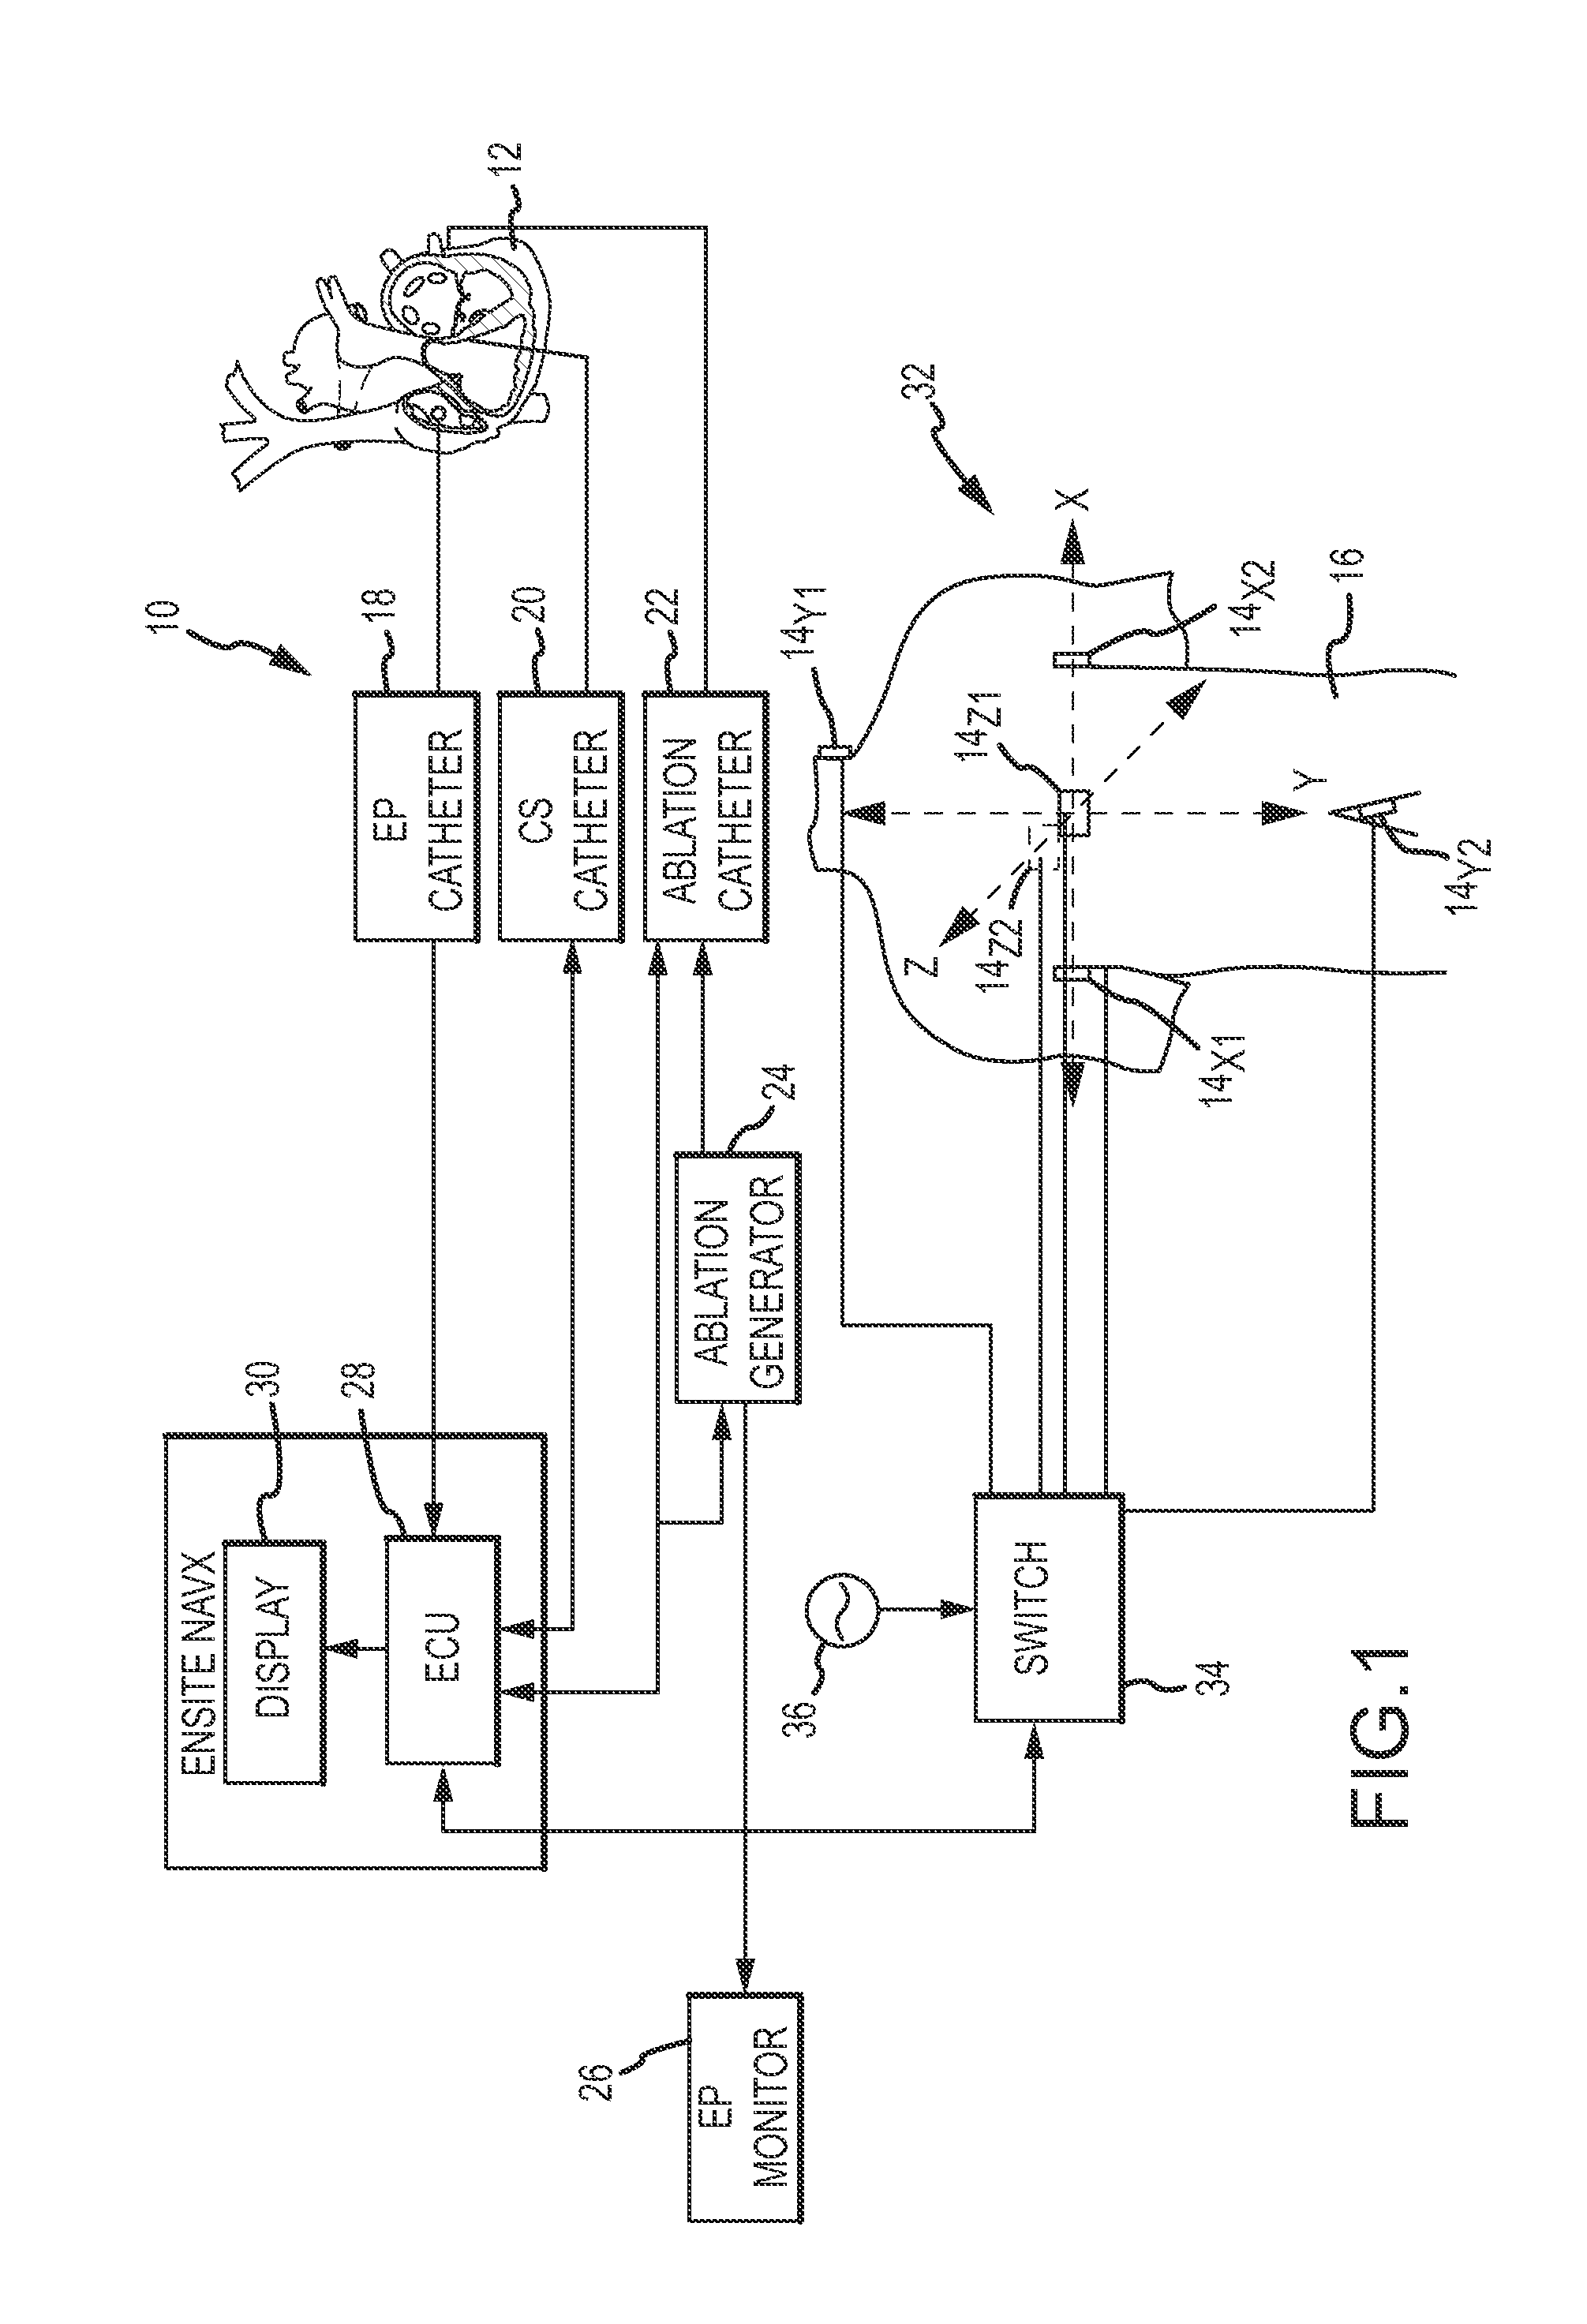 System and method for treating arrhythmias in the heart using information obtained from heart wall motion